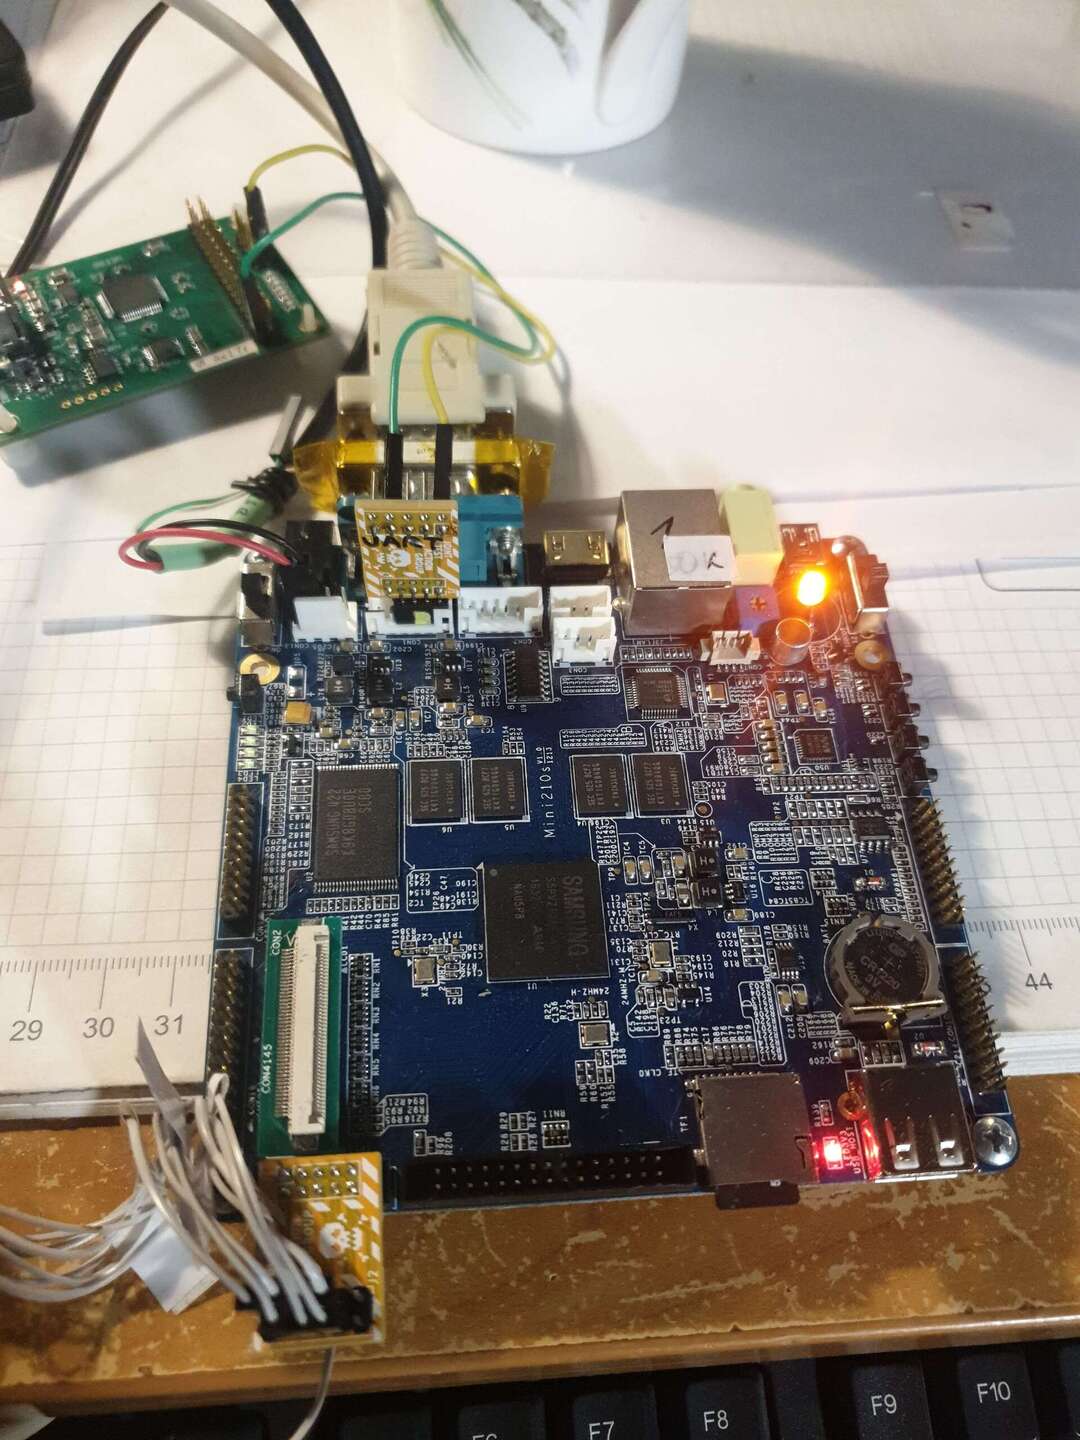 Mini210 connected over JTAG and UART for debugging